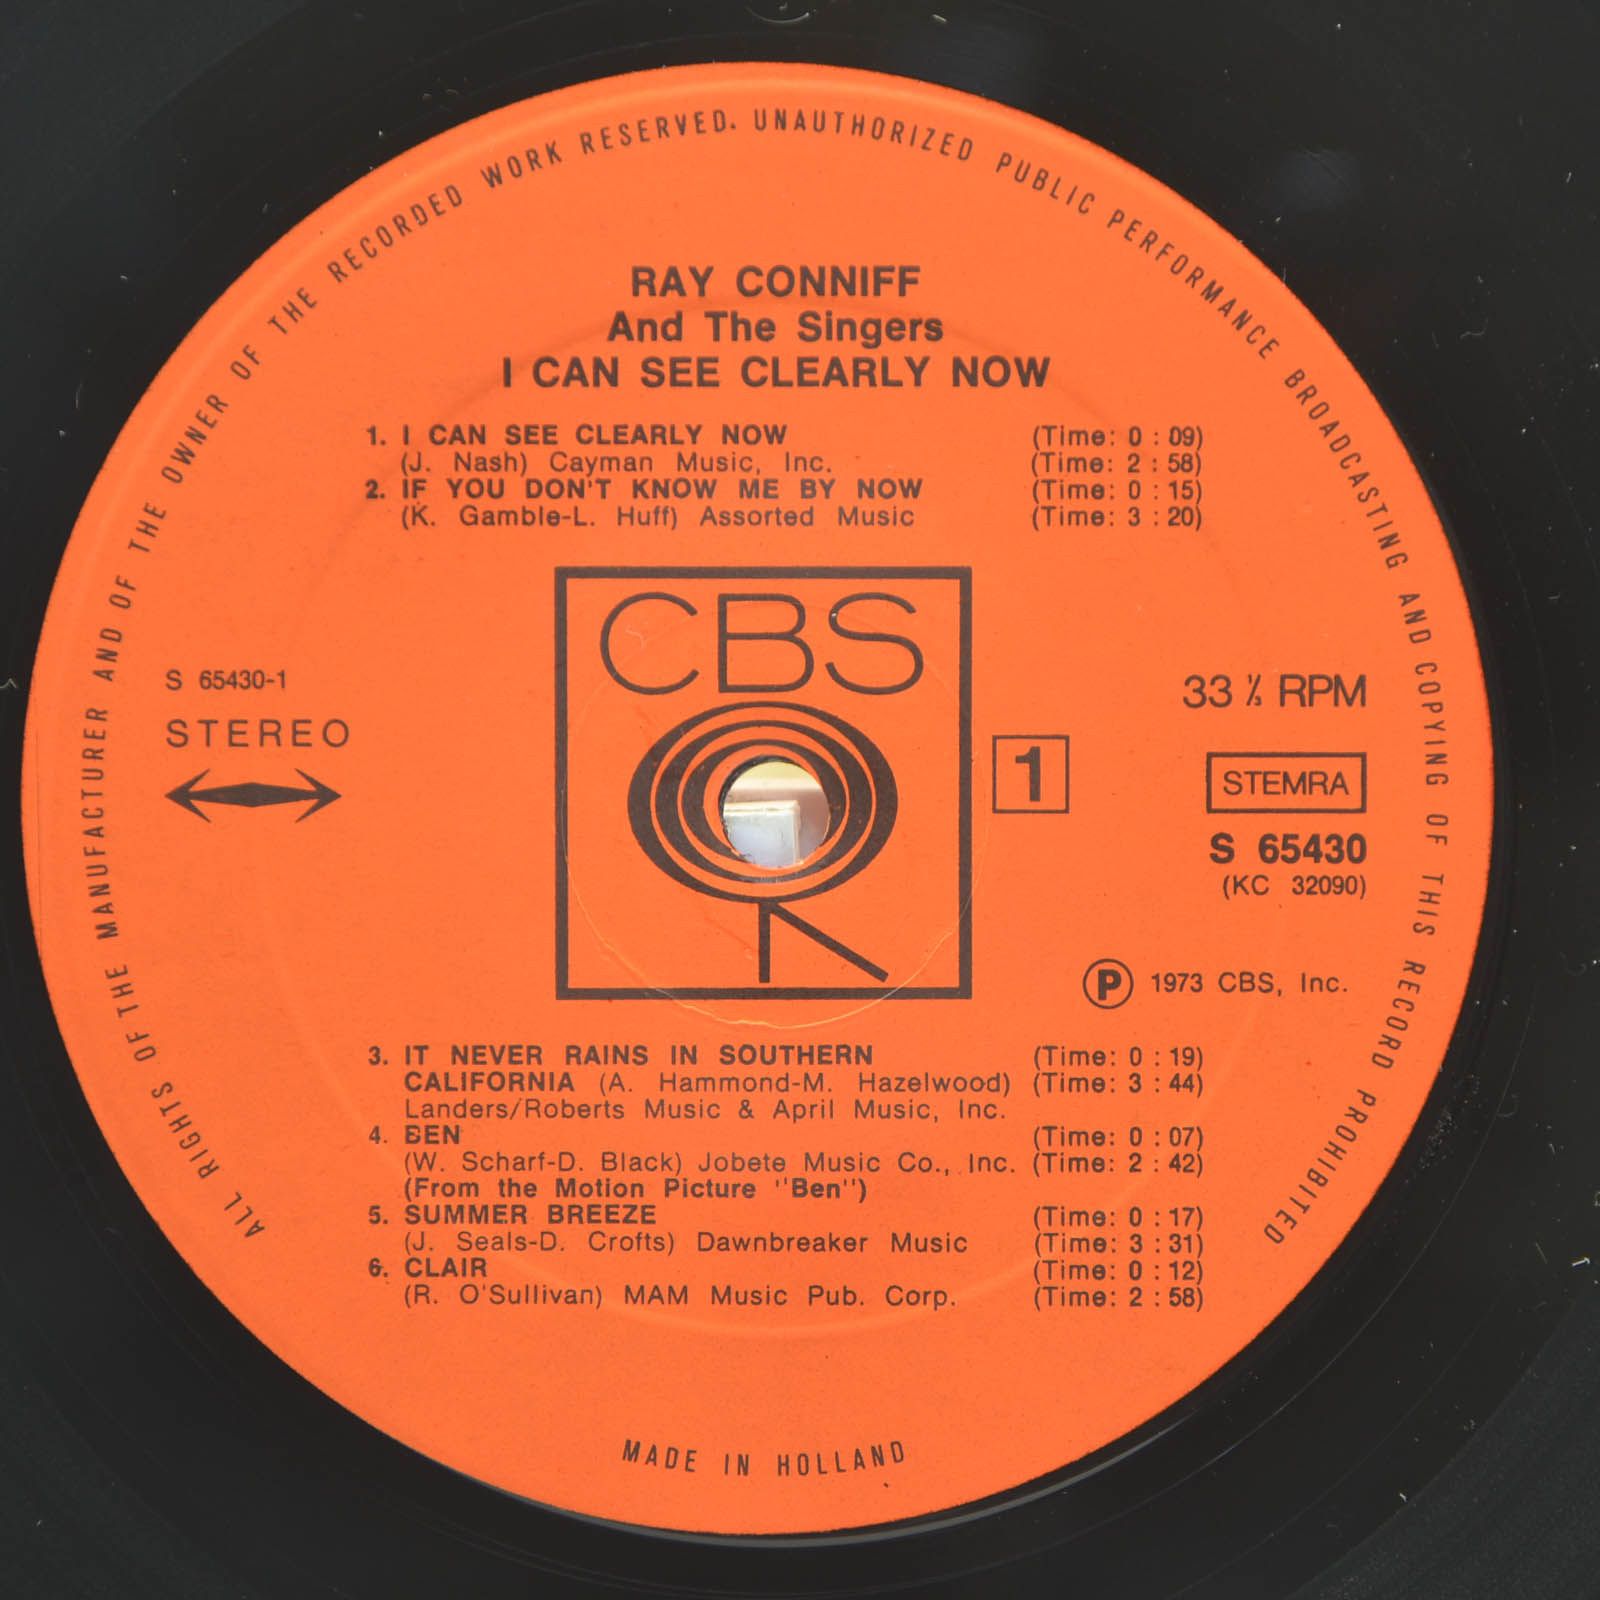 Ray Conniff — I Can See Clearly Now, 1973